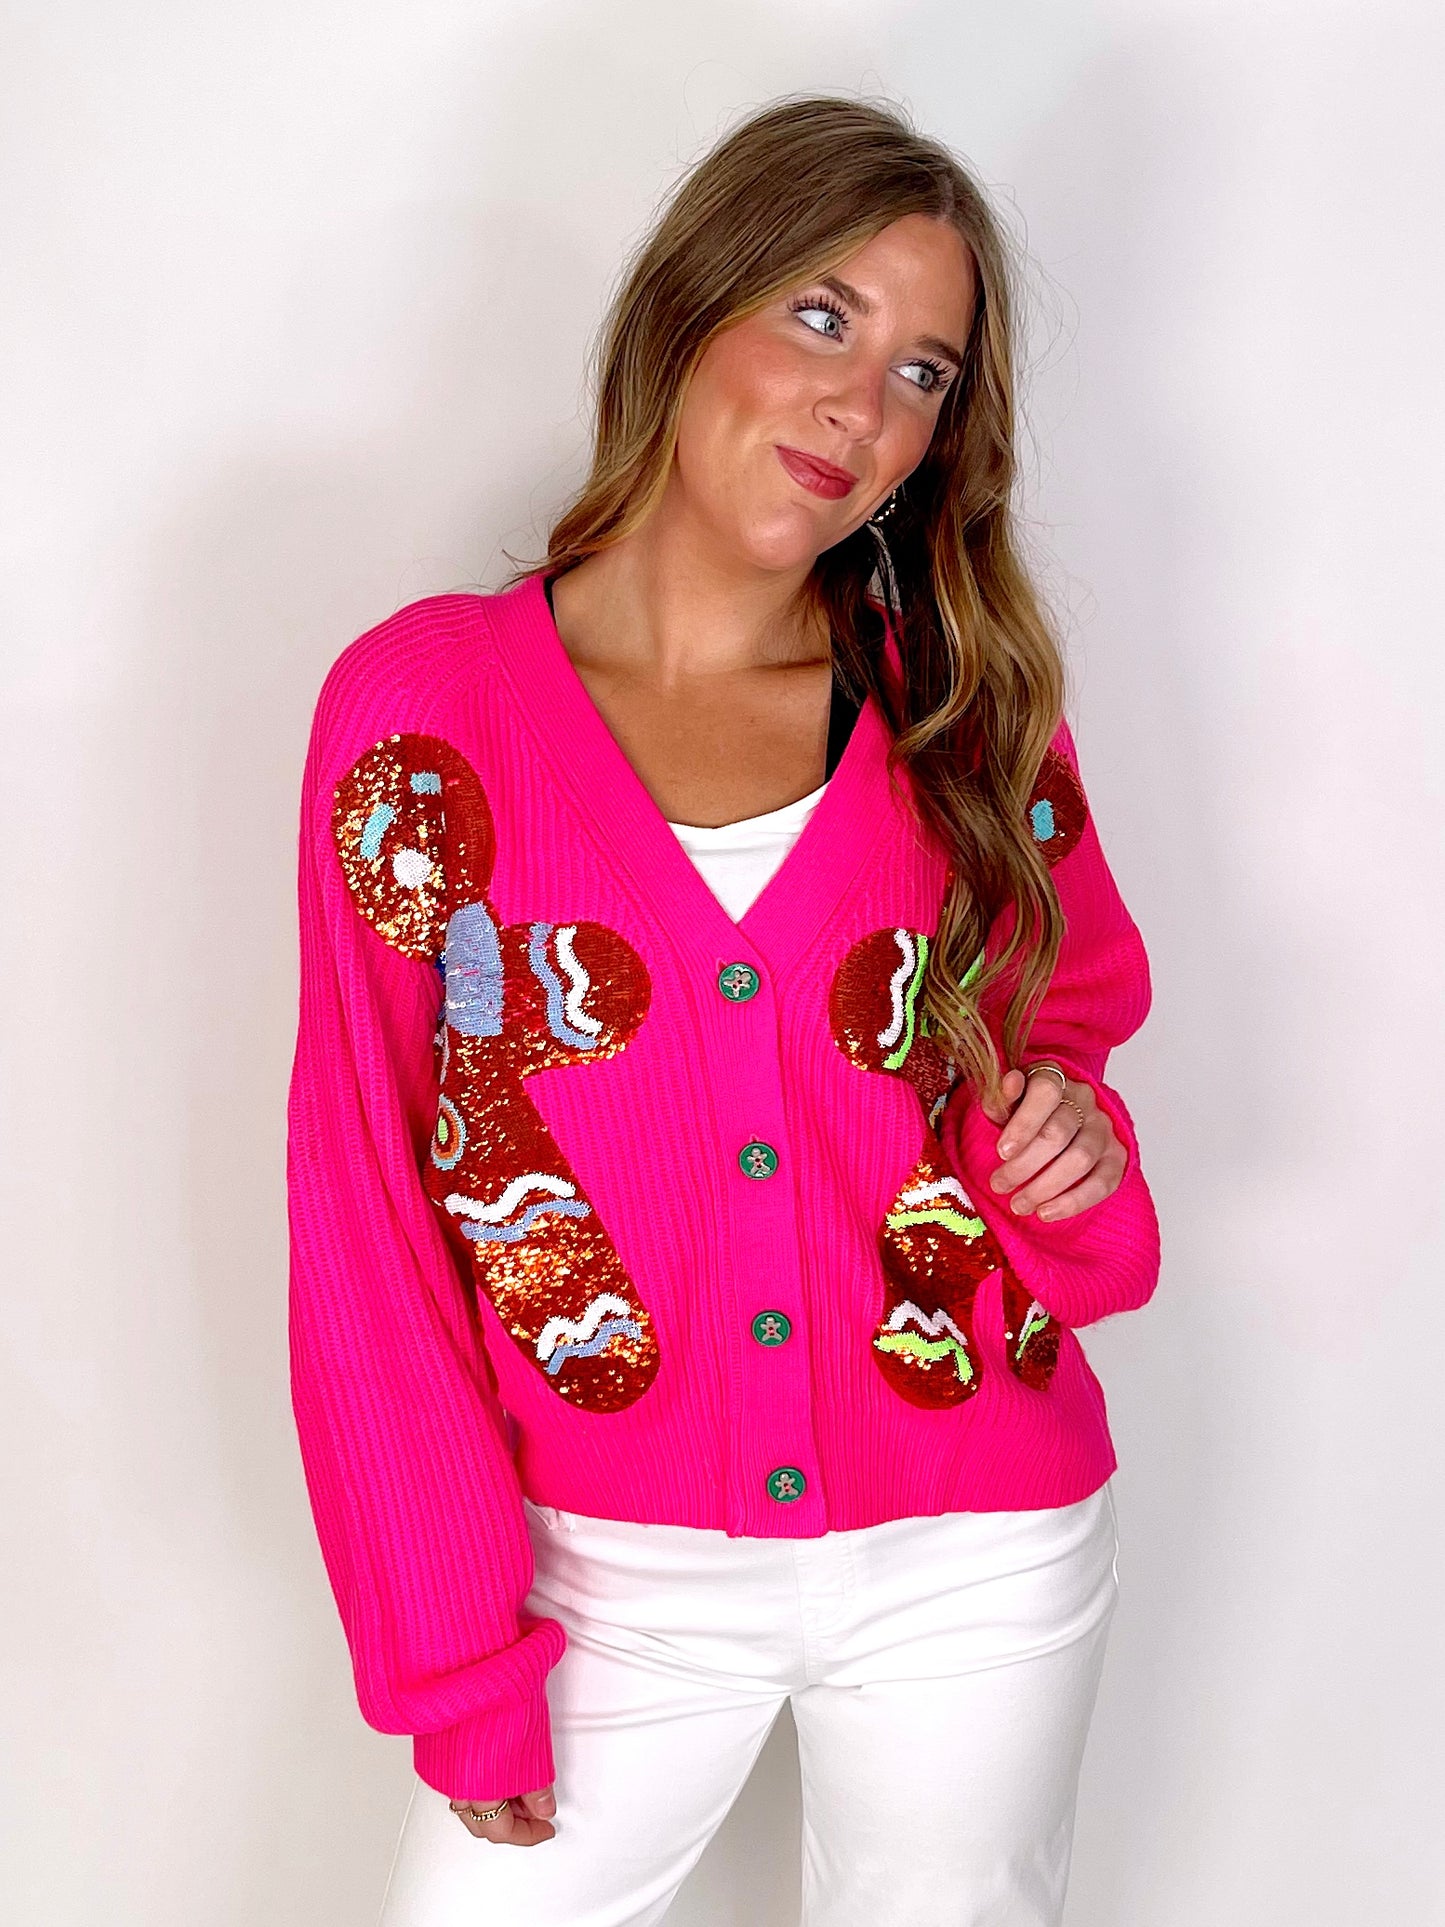 Ginger Snap Sweater | Queen of Sparkles-Sweaters-Queen of Sparkles-The Village Shoppe, Women’s Fashion Boutique, Shop Online and In Store - Located in Muscle Shoals, AL.